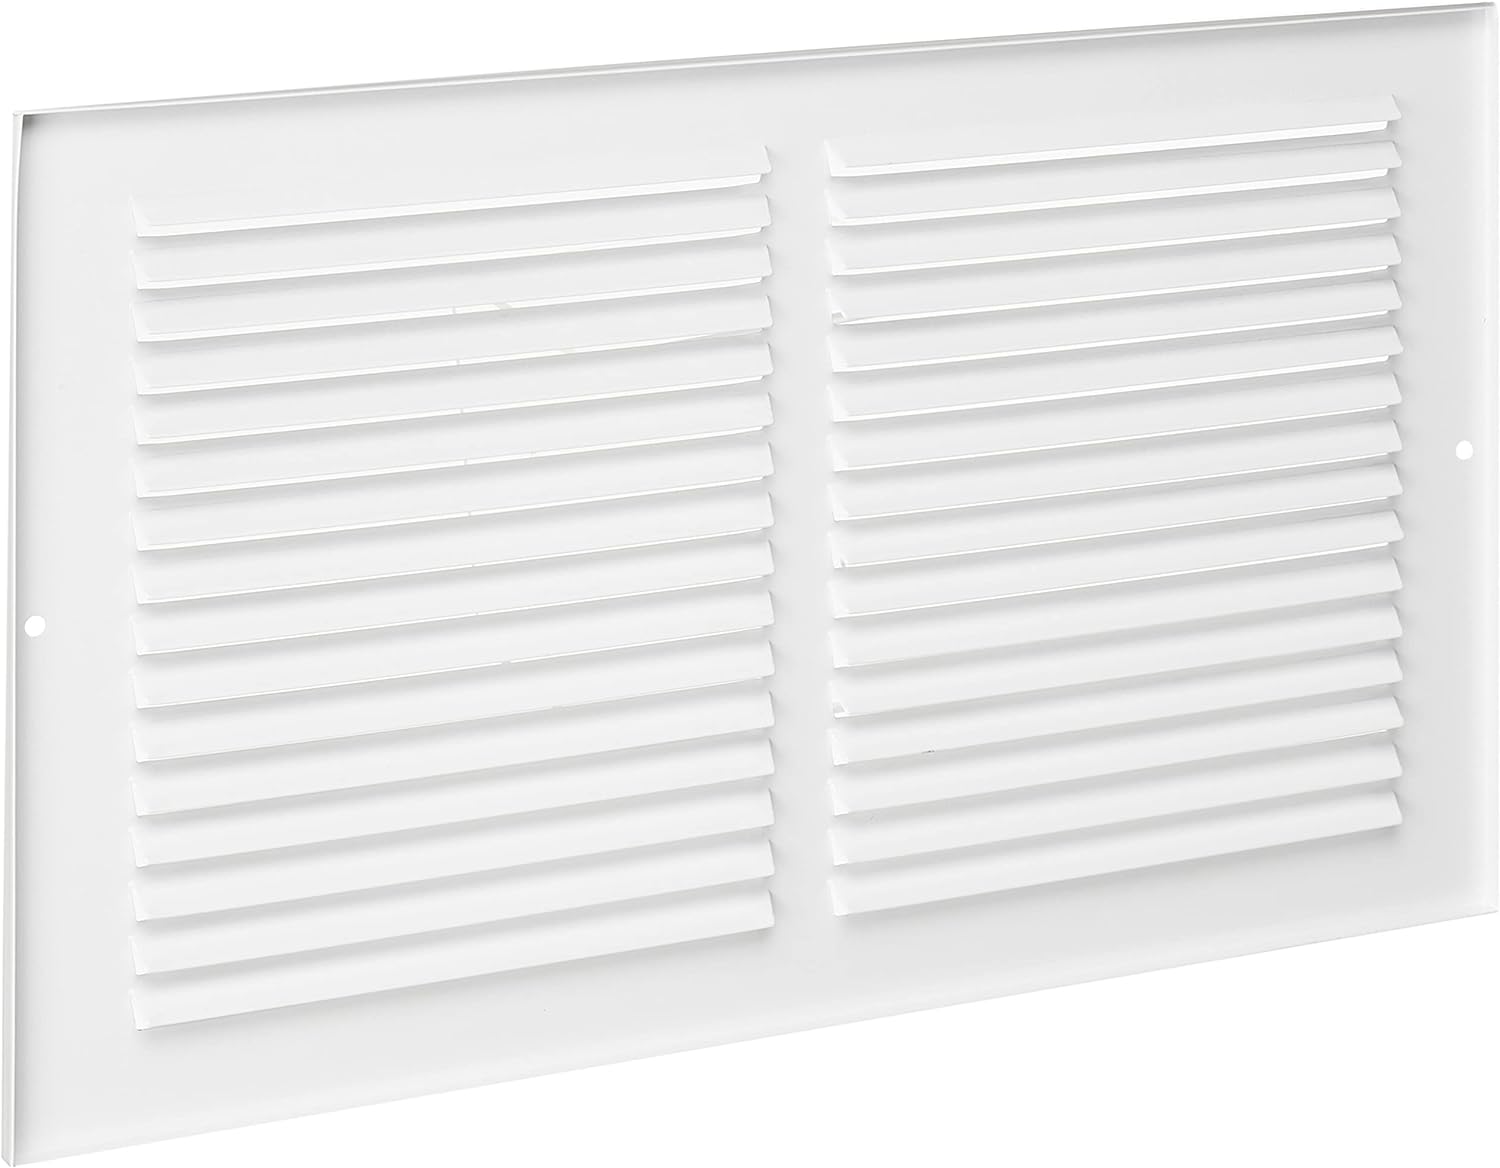 Amazon Basics 1RA1408WH White 14&#226;&#128;&#157; W X 8" H Return Air Grille Duct Cover for Ceiling and Wall 1 Pack